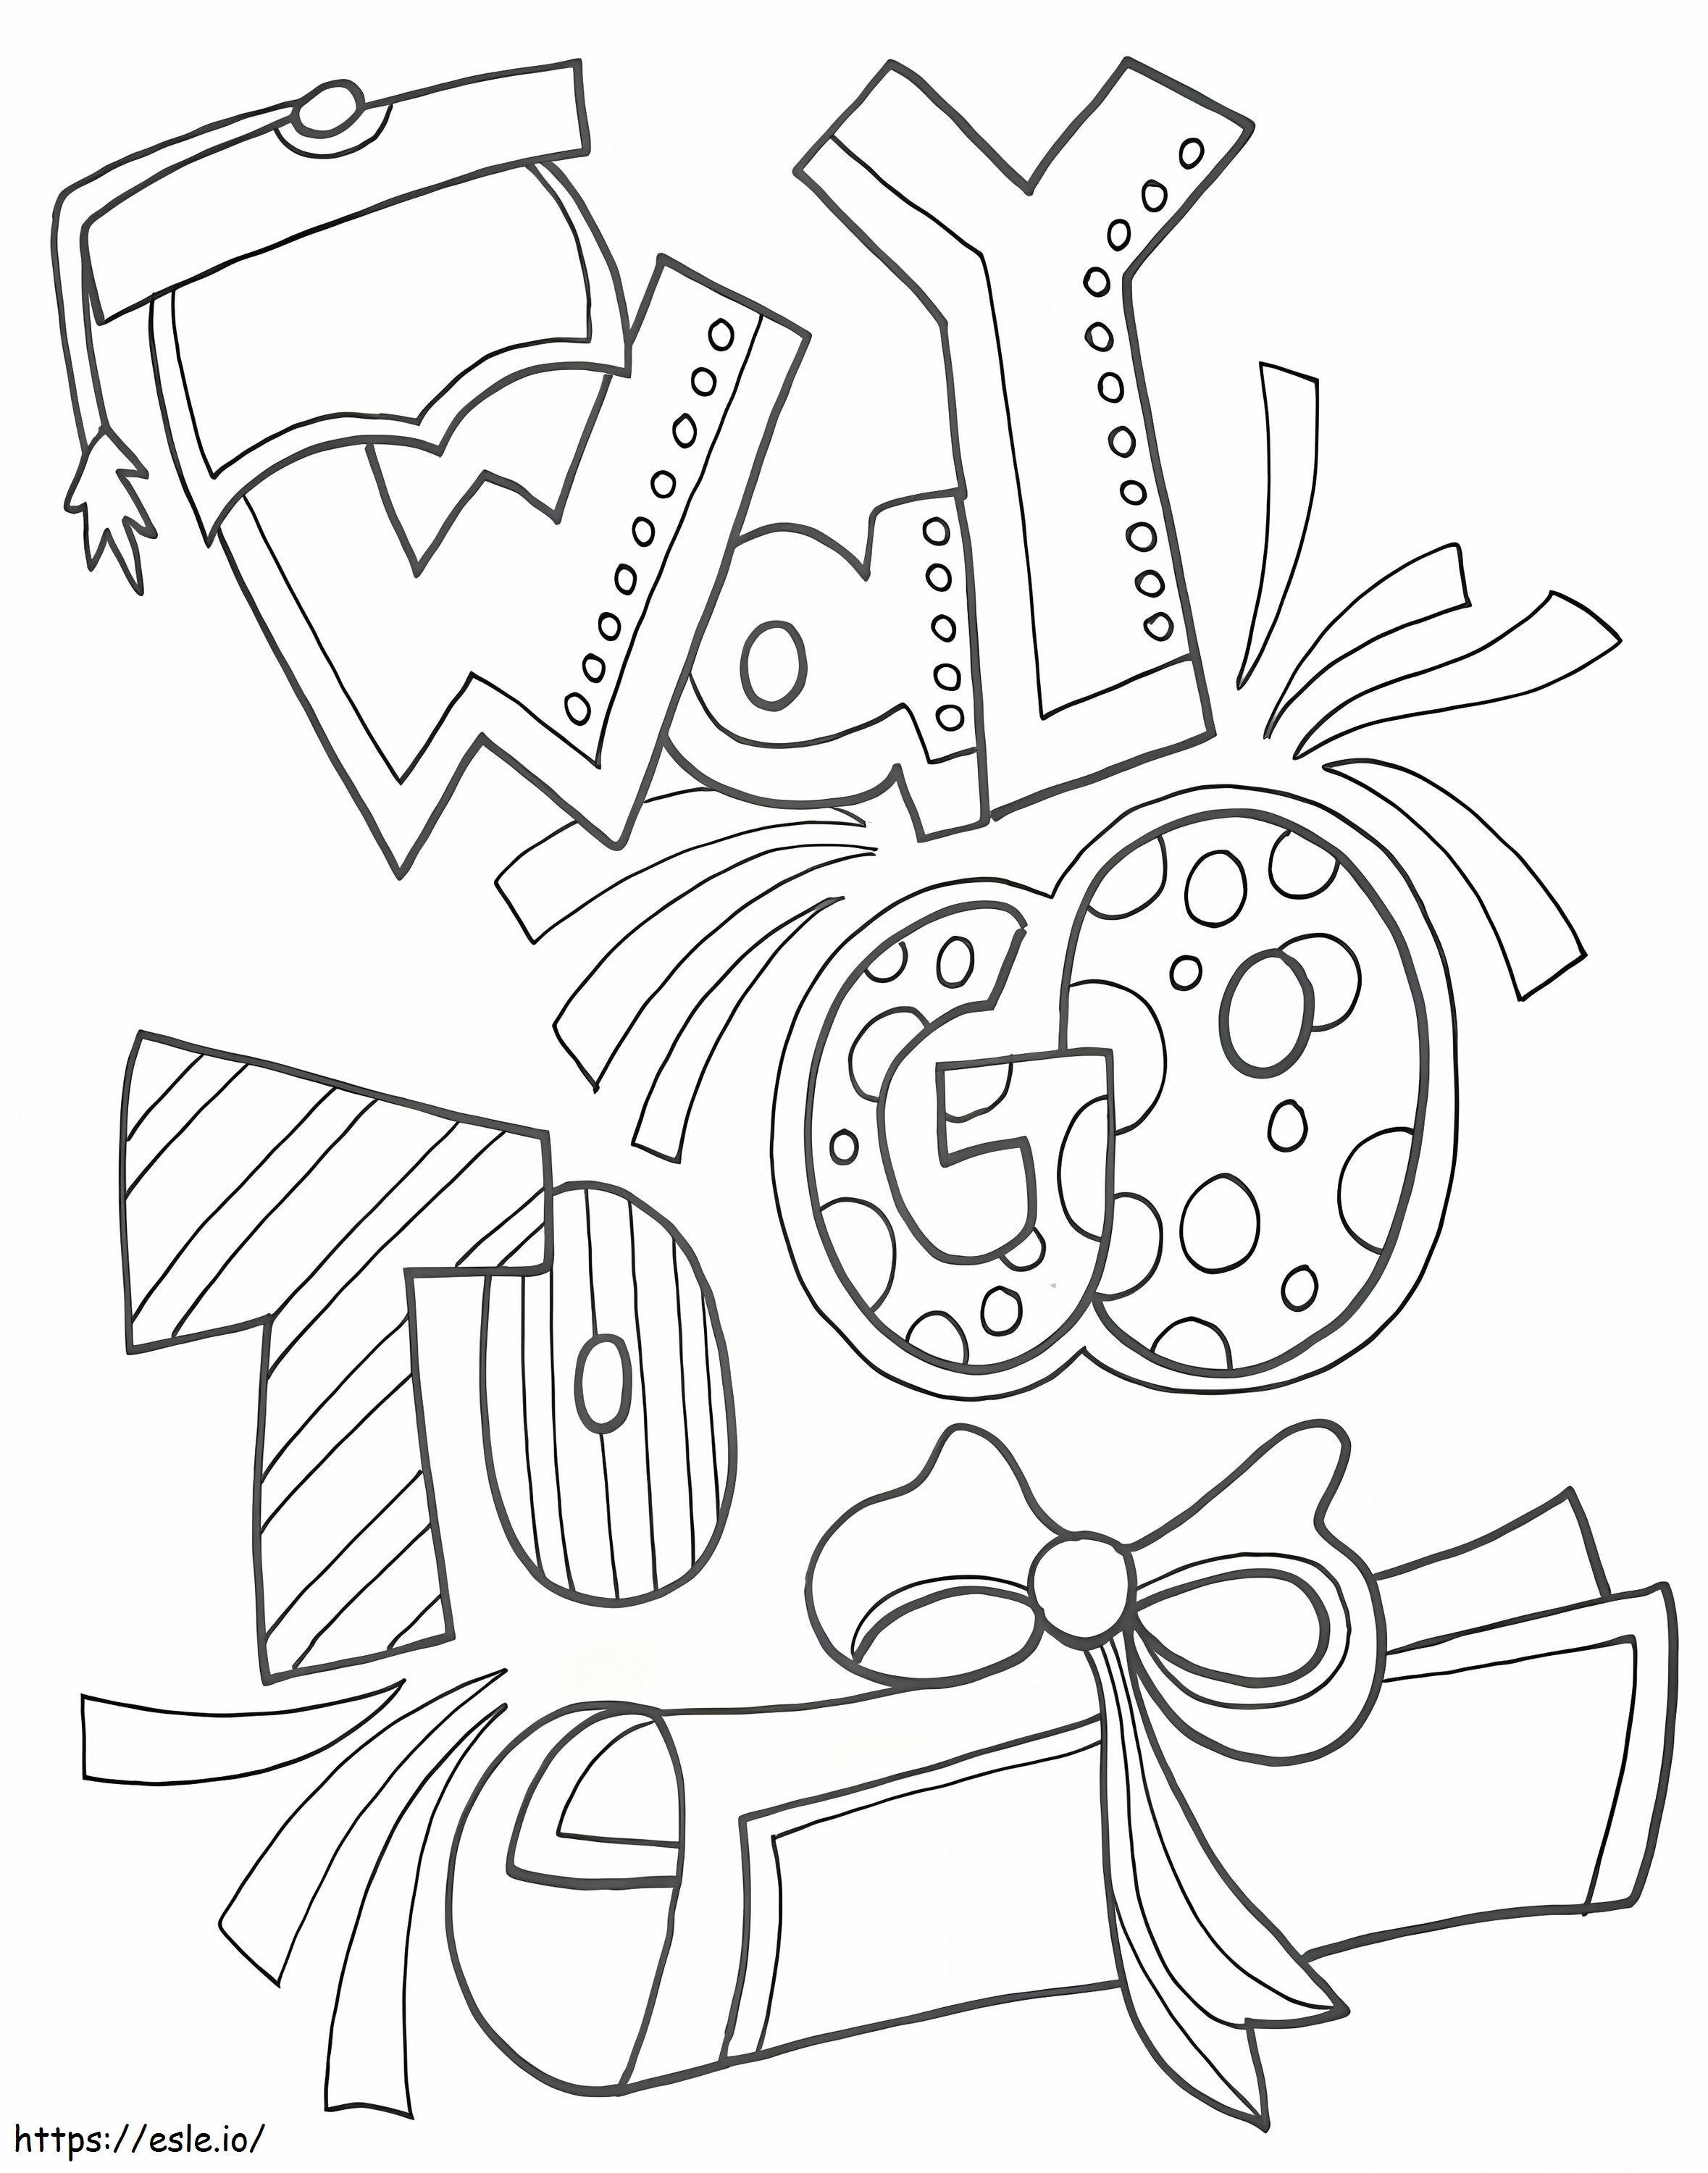 Way To Go coloring page